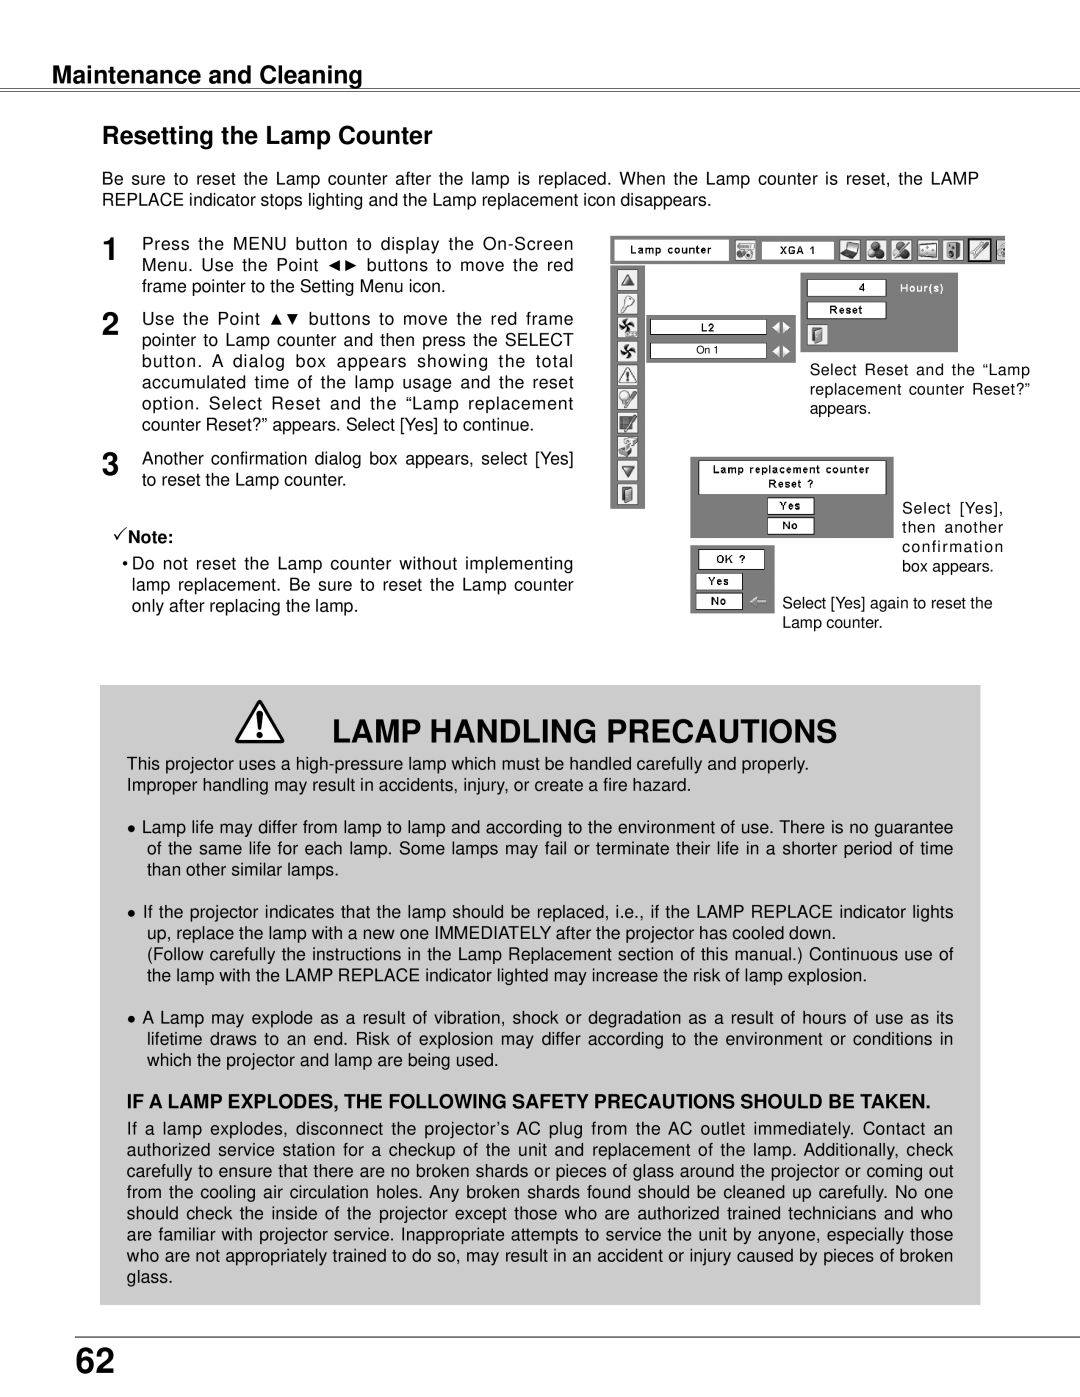 Eiki LC-XB42N owner manual Maintenance and Cleaning Resetting the Lamp Counter, Lamp Handling Precautions 